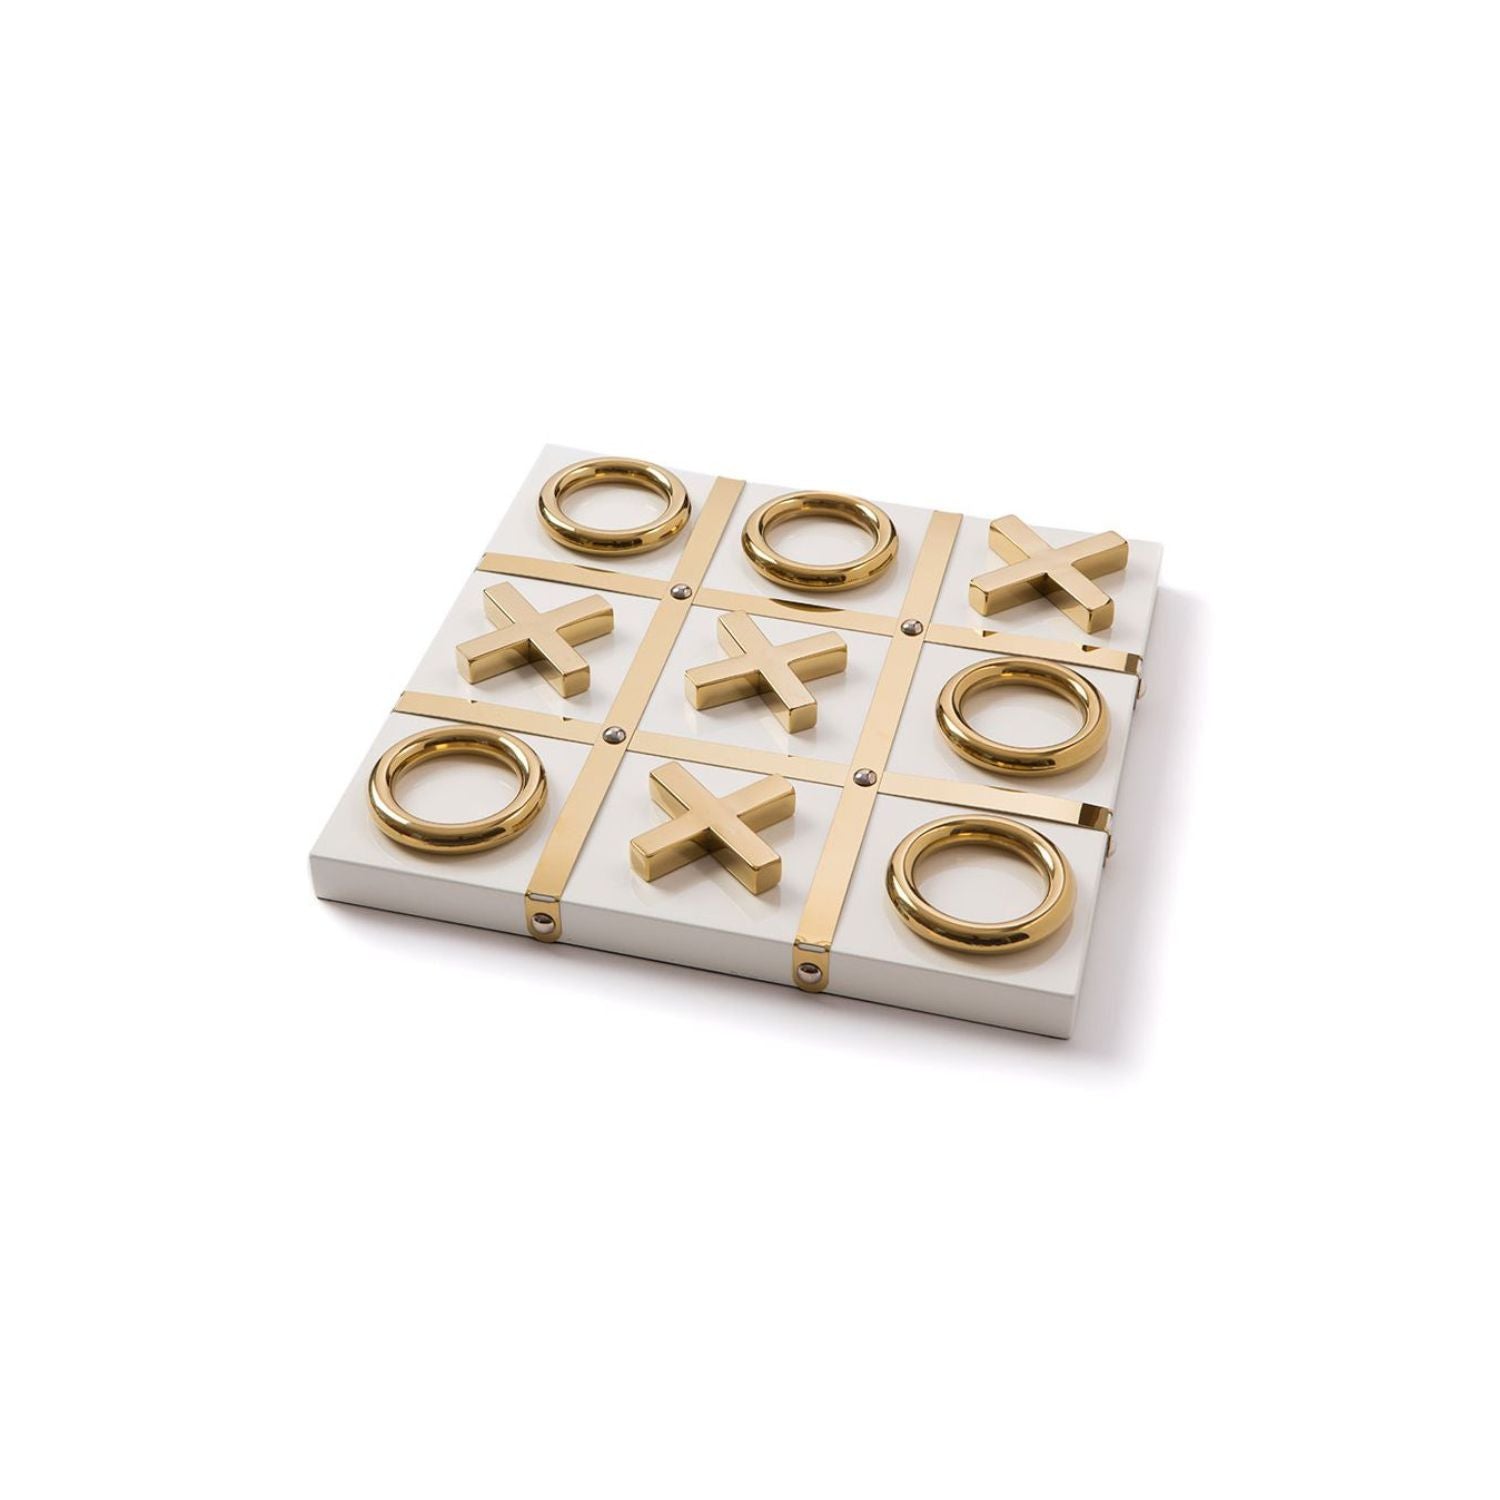 White and Gold Tic Tac Toe